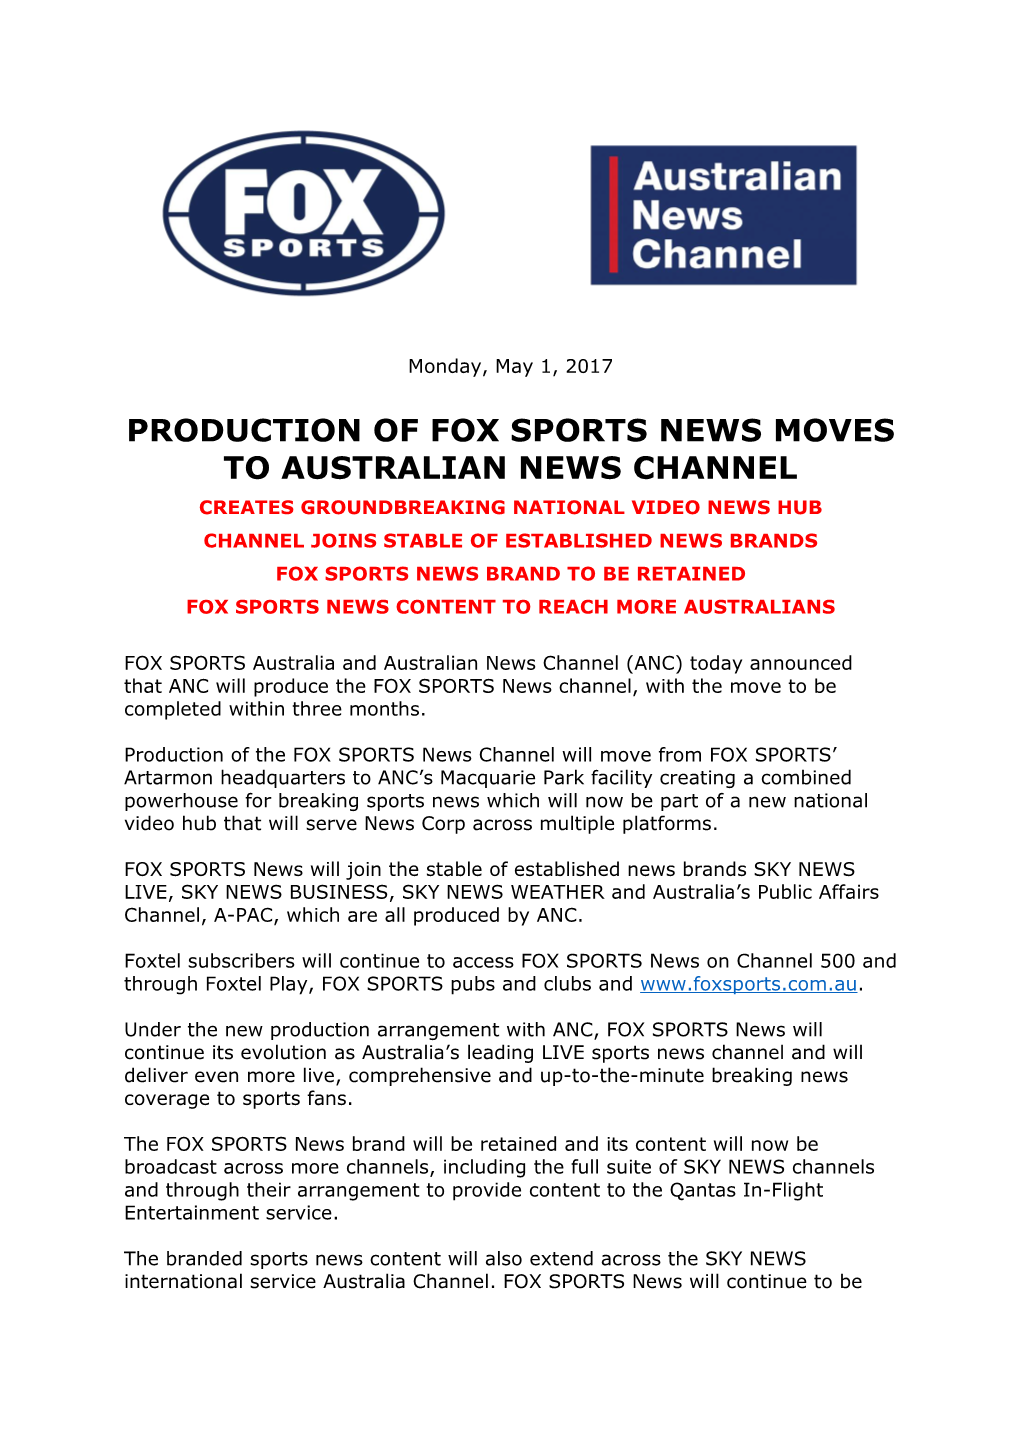 Production of Fox Sports News Moves to Australian